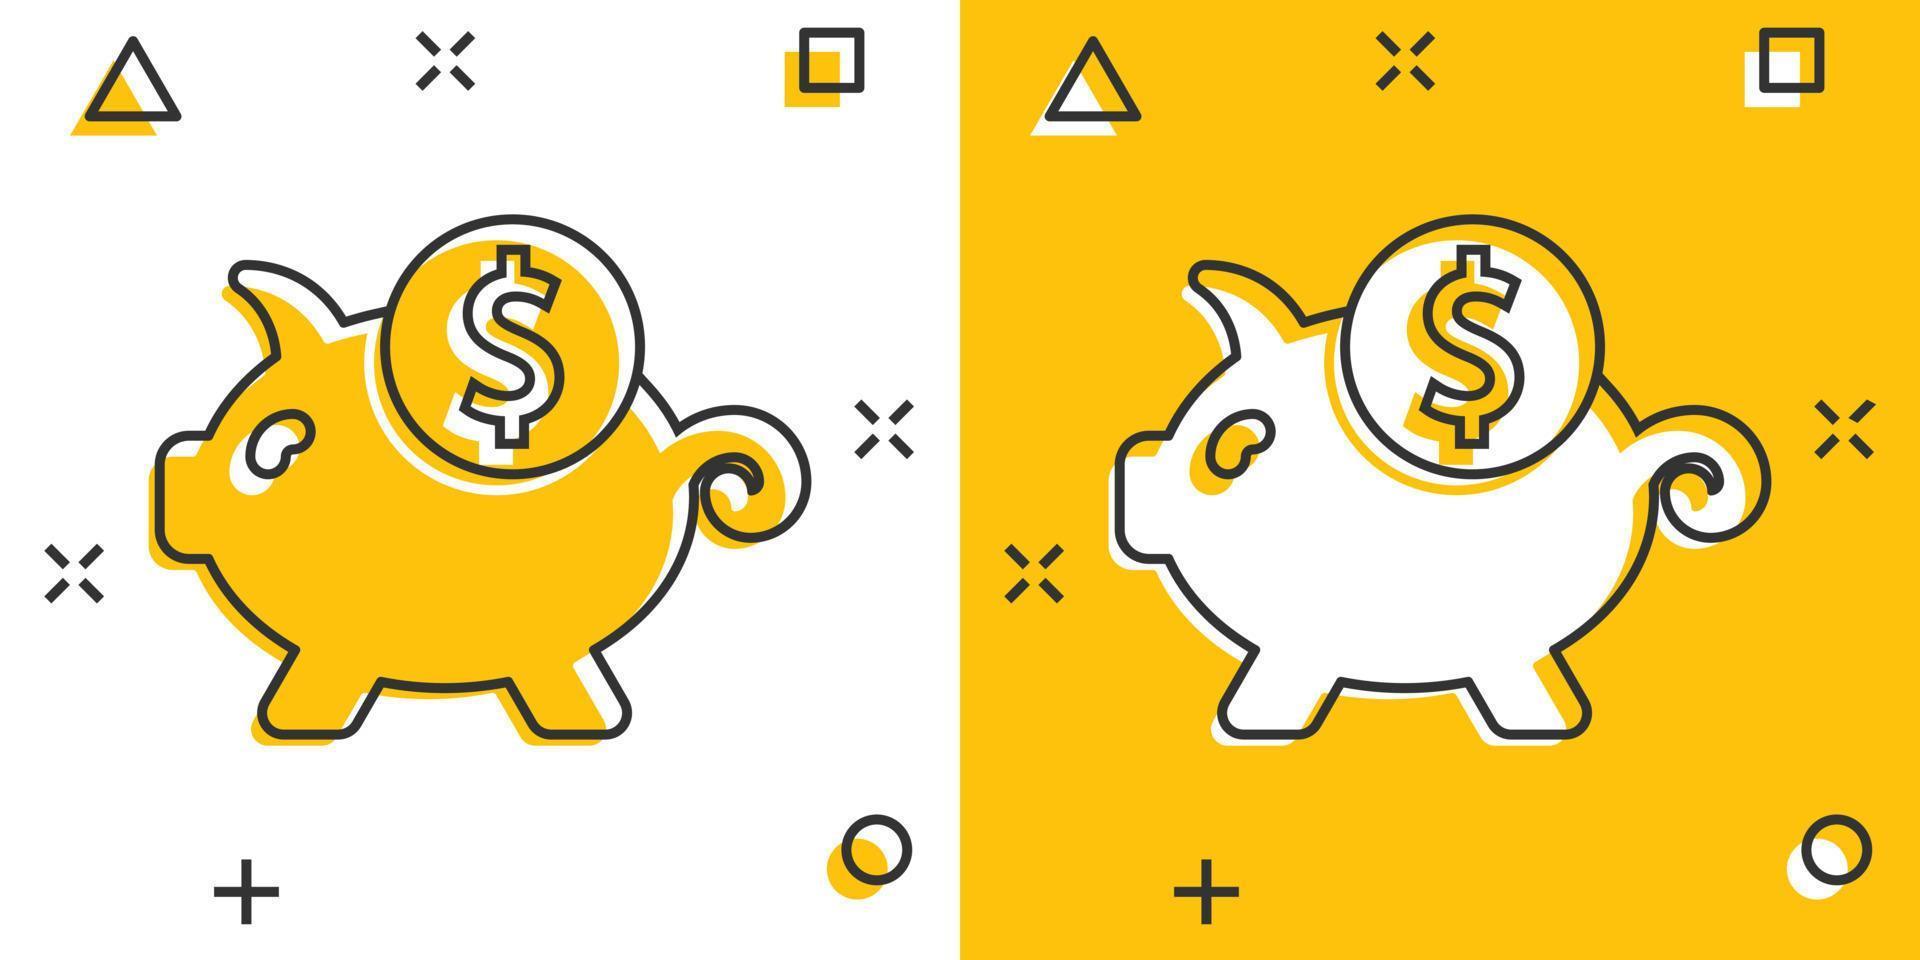 Money box icon in comic style. Pig container cartoon vector illustration on white isolated background. Piggy bank splash effect business concept.